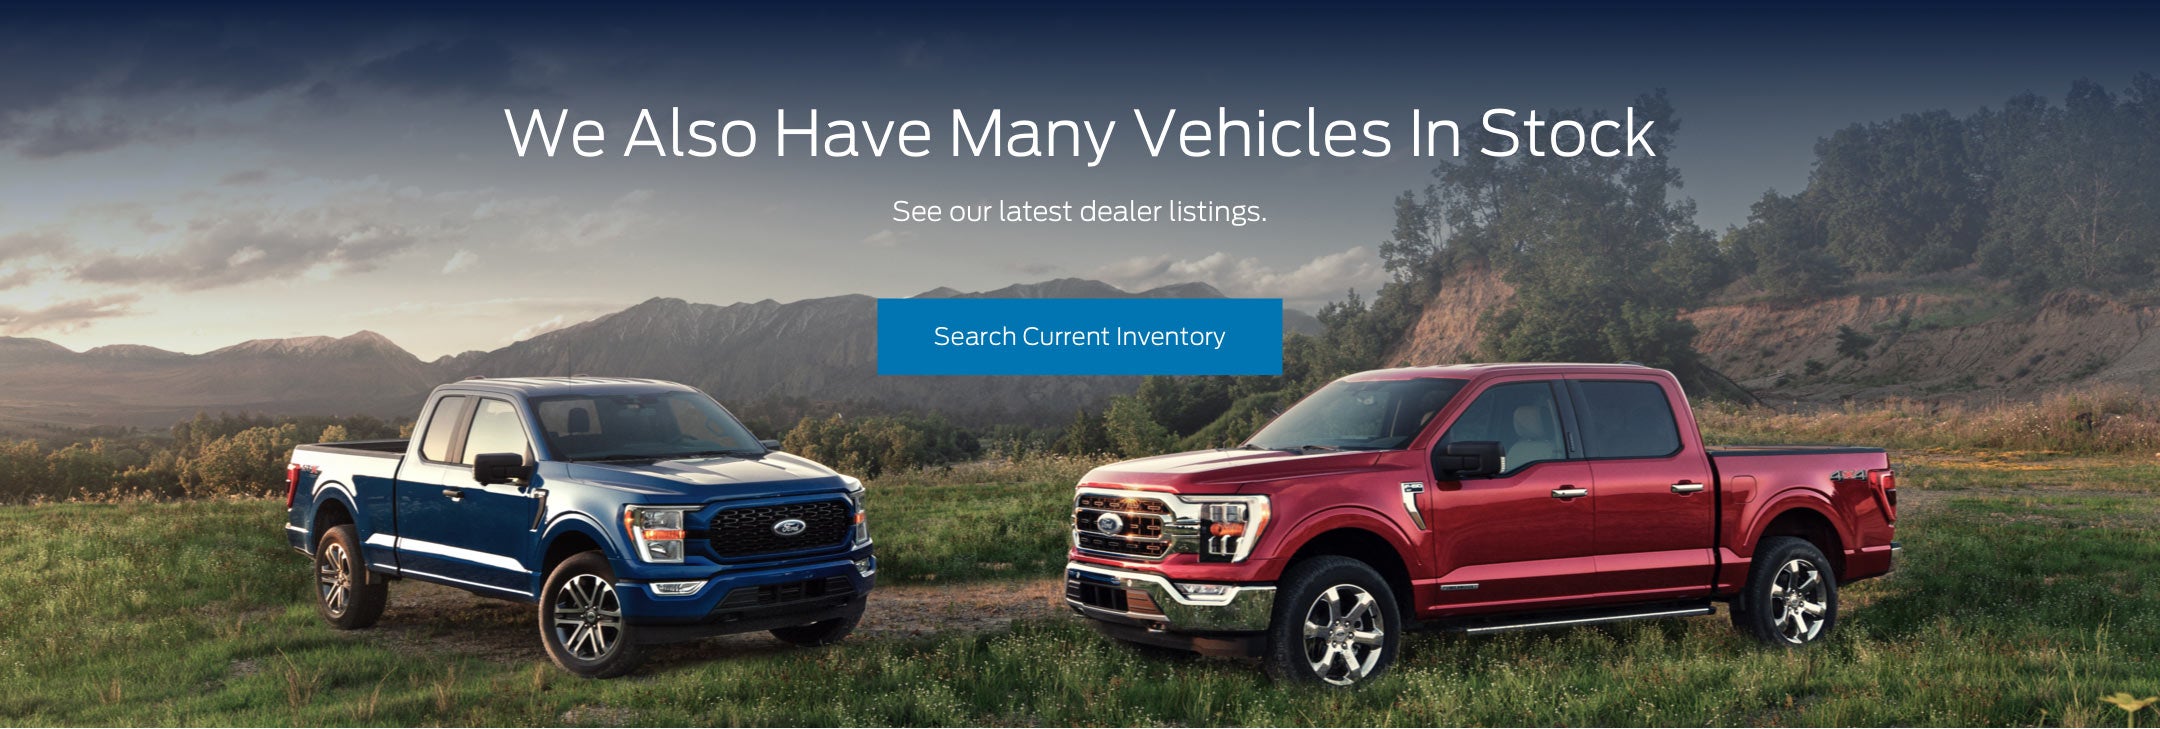 Ford vehicles in stock | Bob Poynter Ford, Inc. in Seymour IN